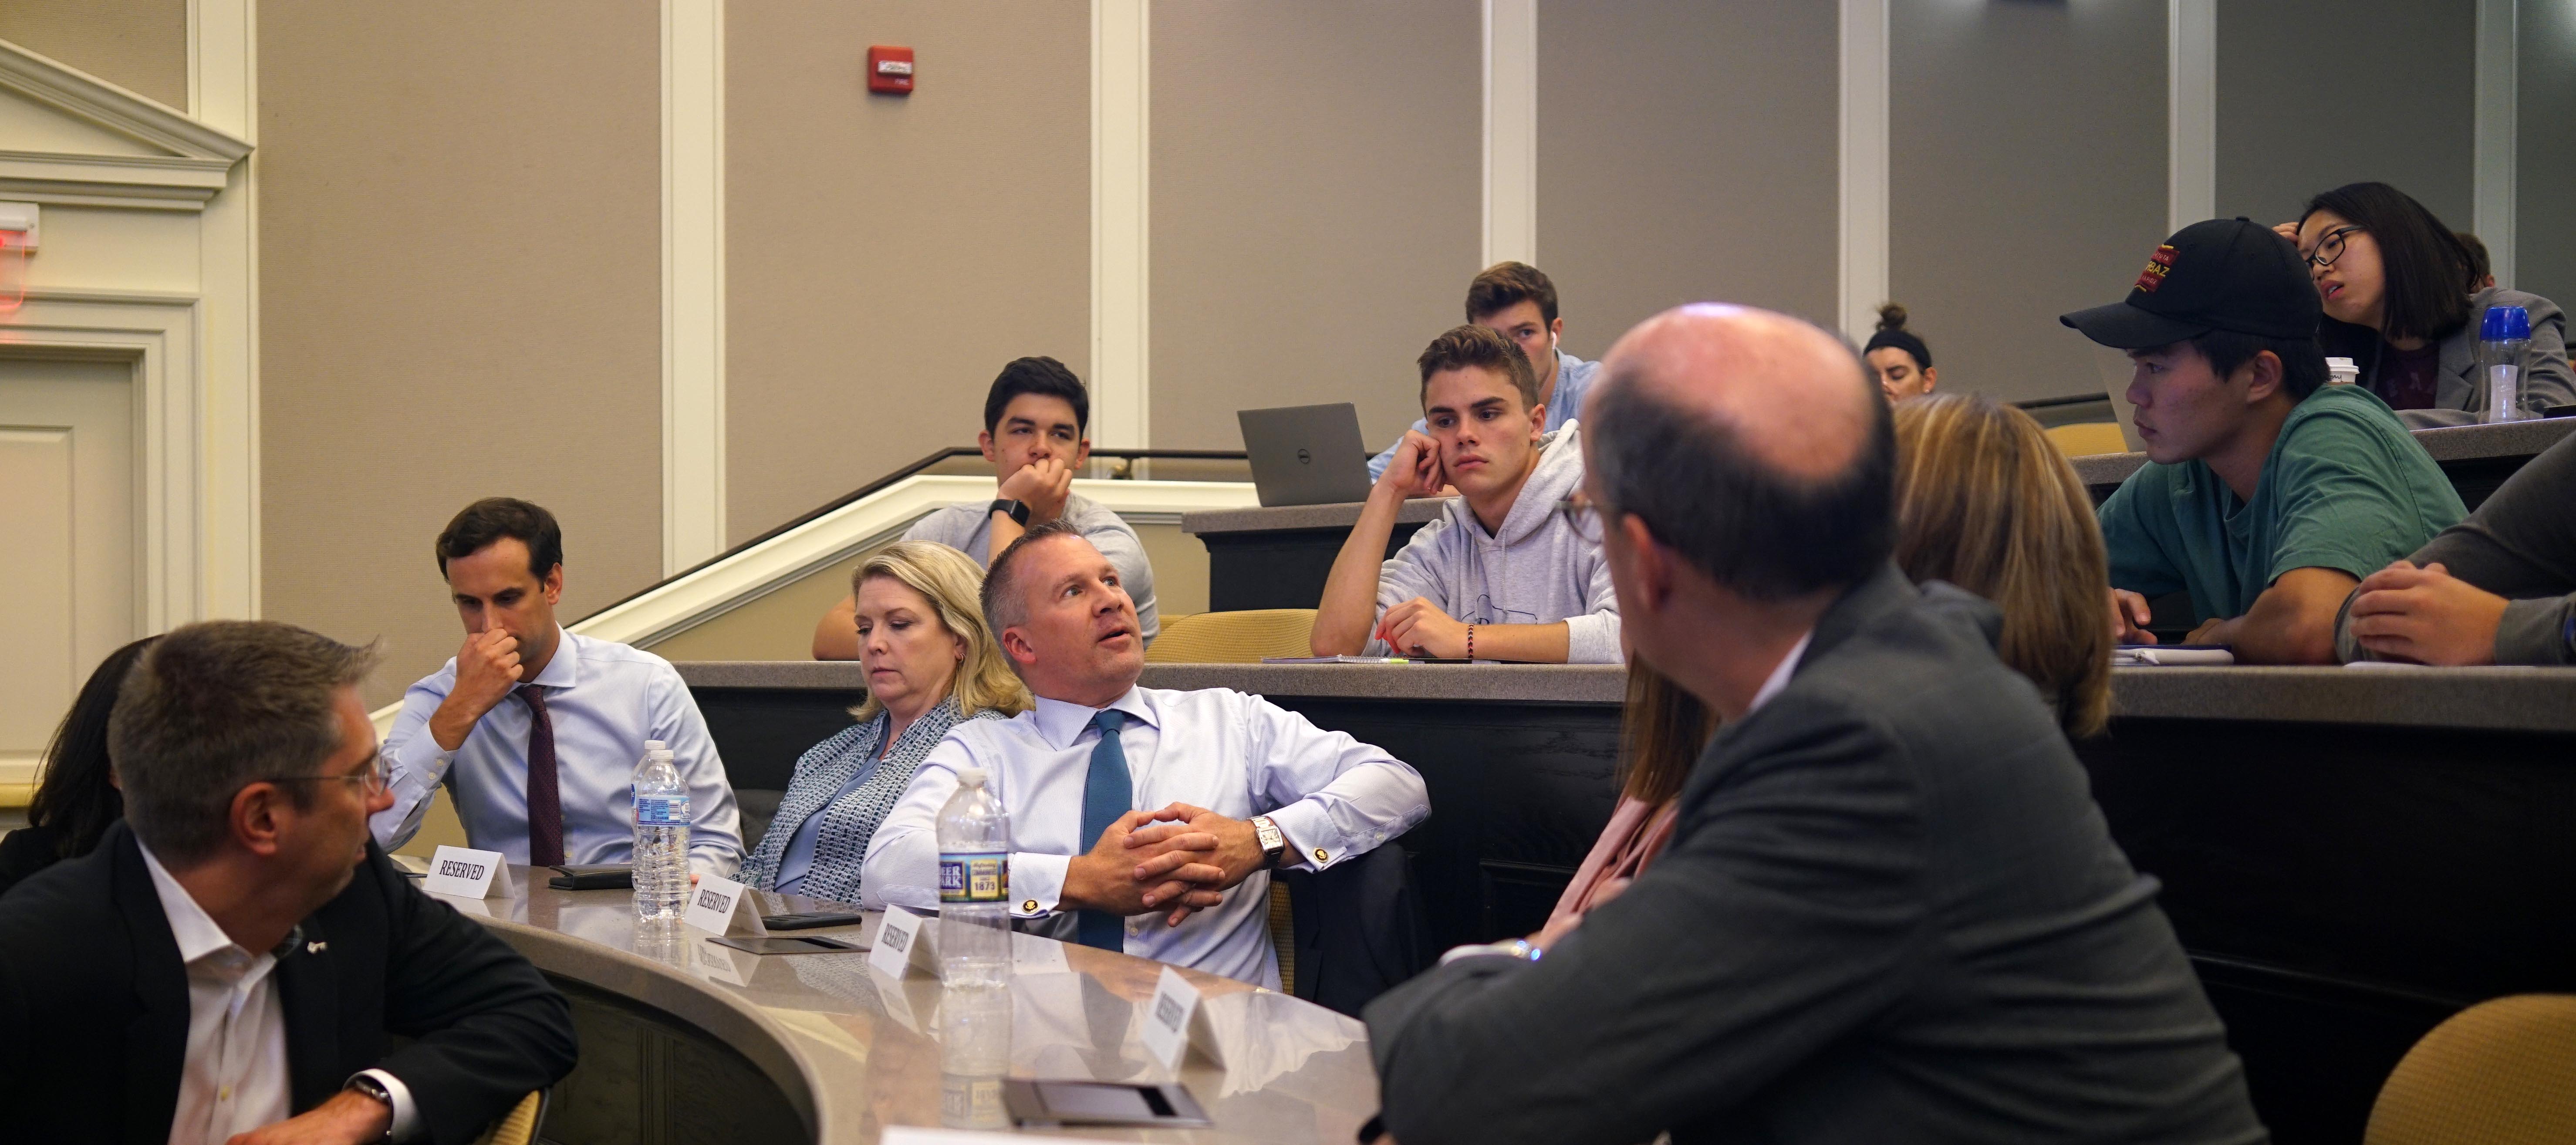  A Fifth Third Bank executive answer a student's question at a presentation